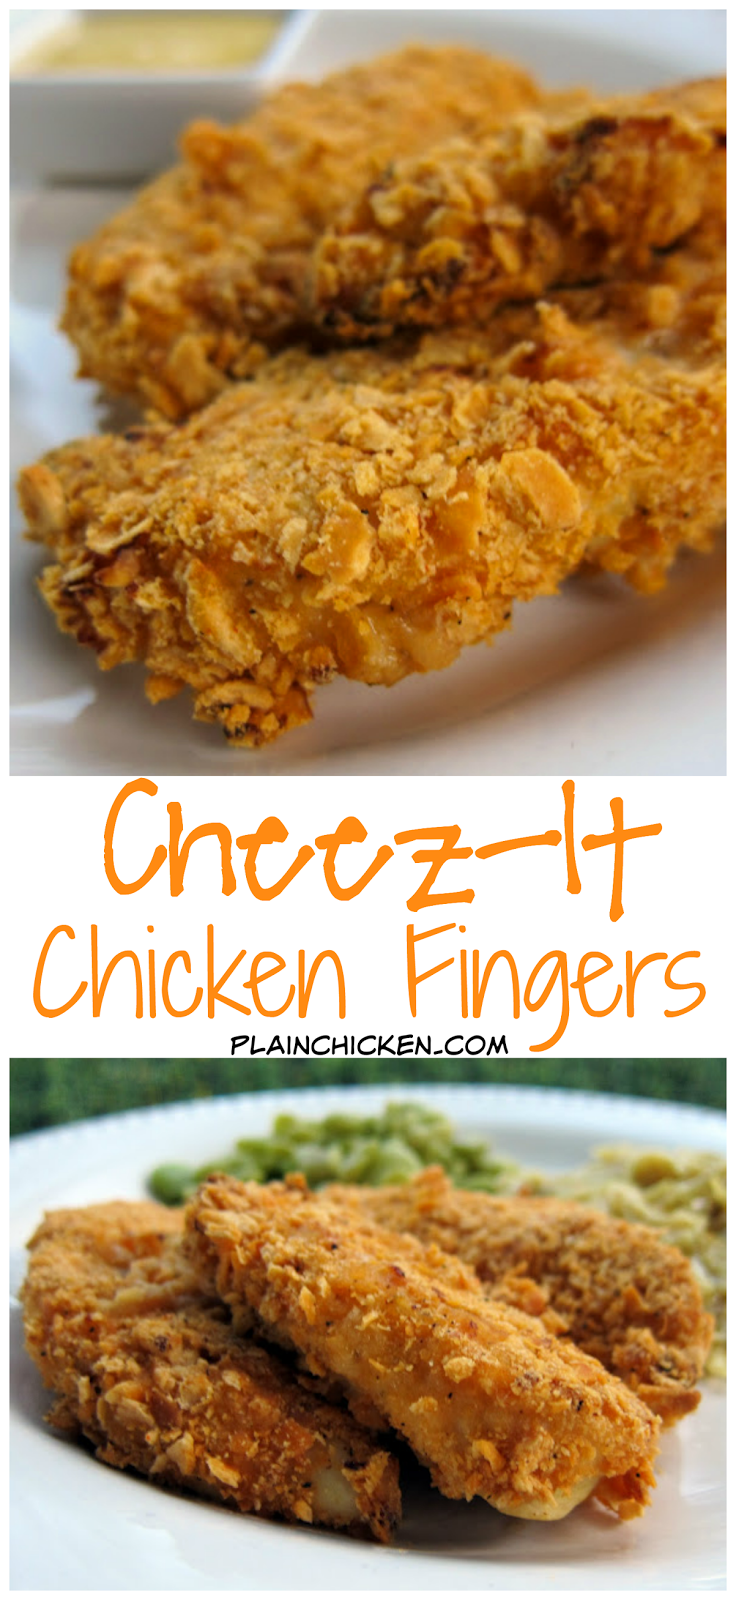 Cheez-It Chicken Fingers - chicken tenders coated in crushed Cheez-Its and baked - SOOOO good! Kids and adults love these! Ready in 15 minutes. Can coat and freeze to bake later.